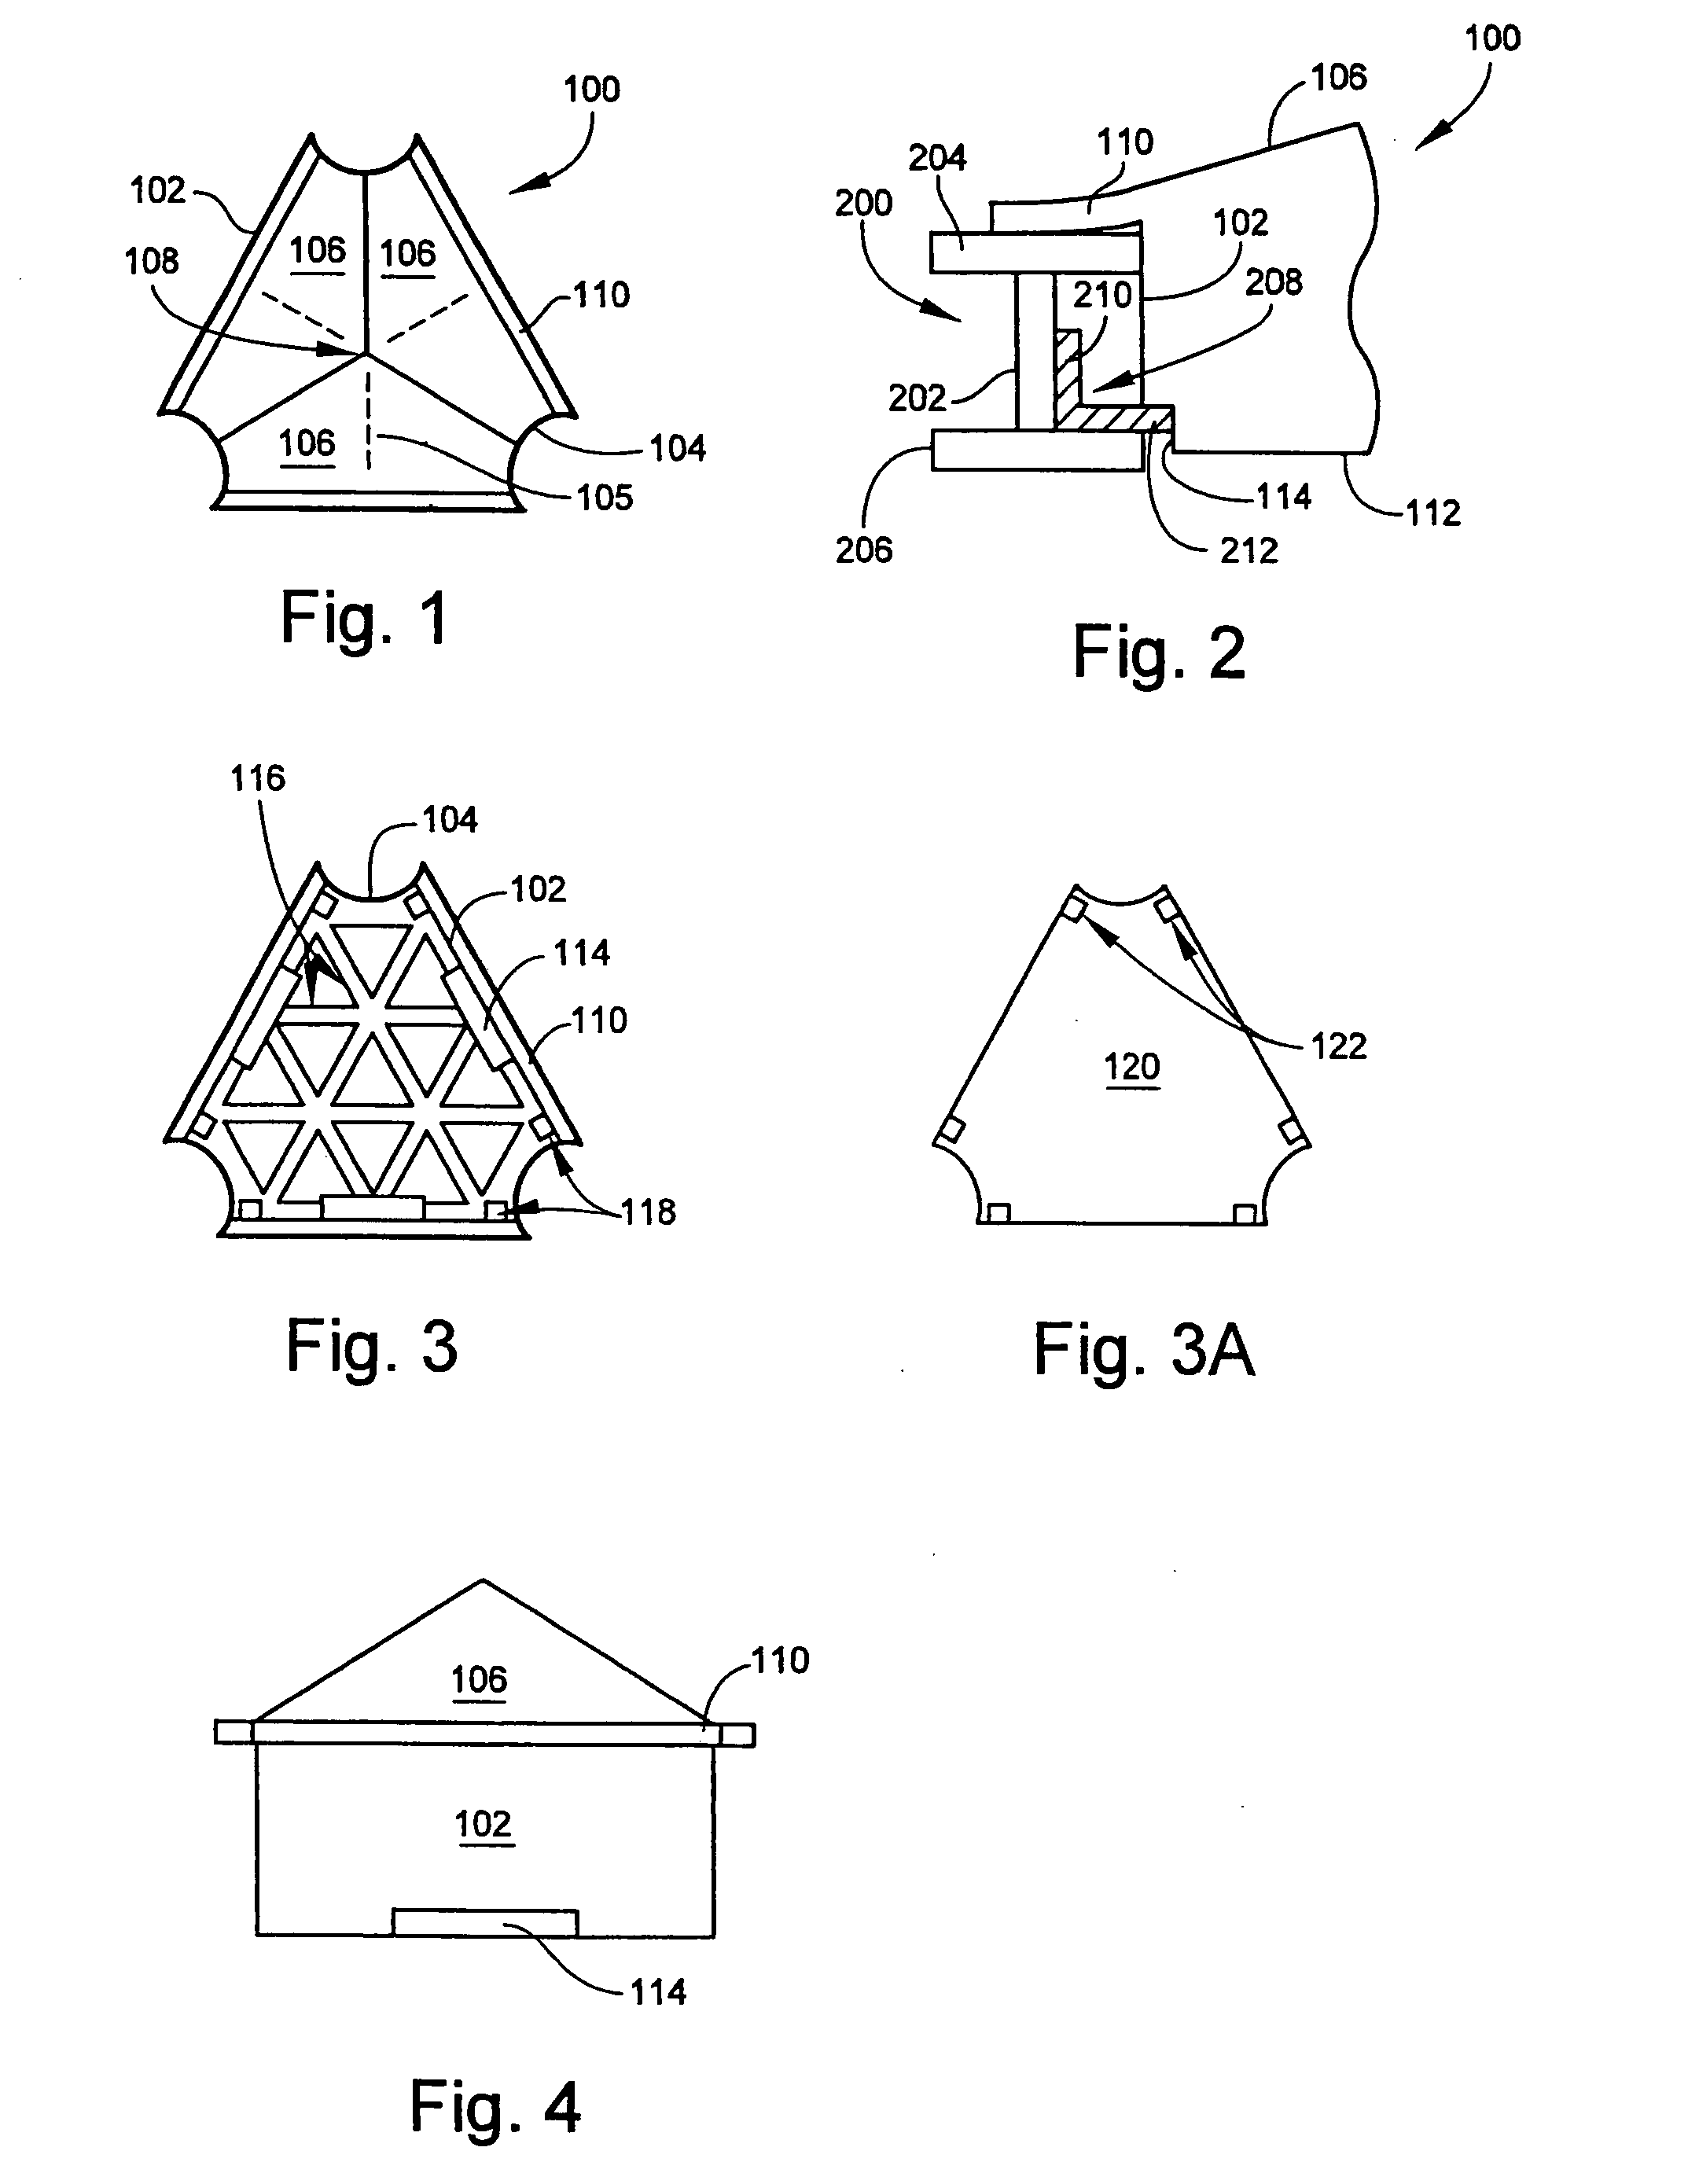 Tile and strut construction system for geodesic dome